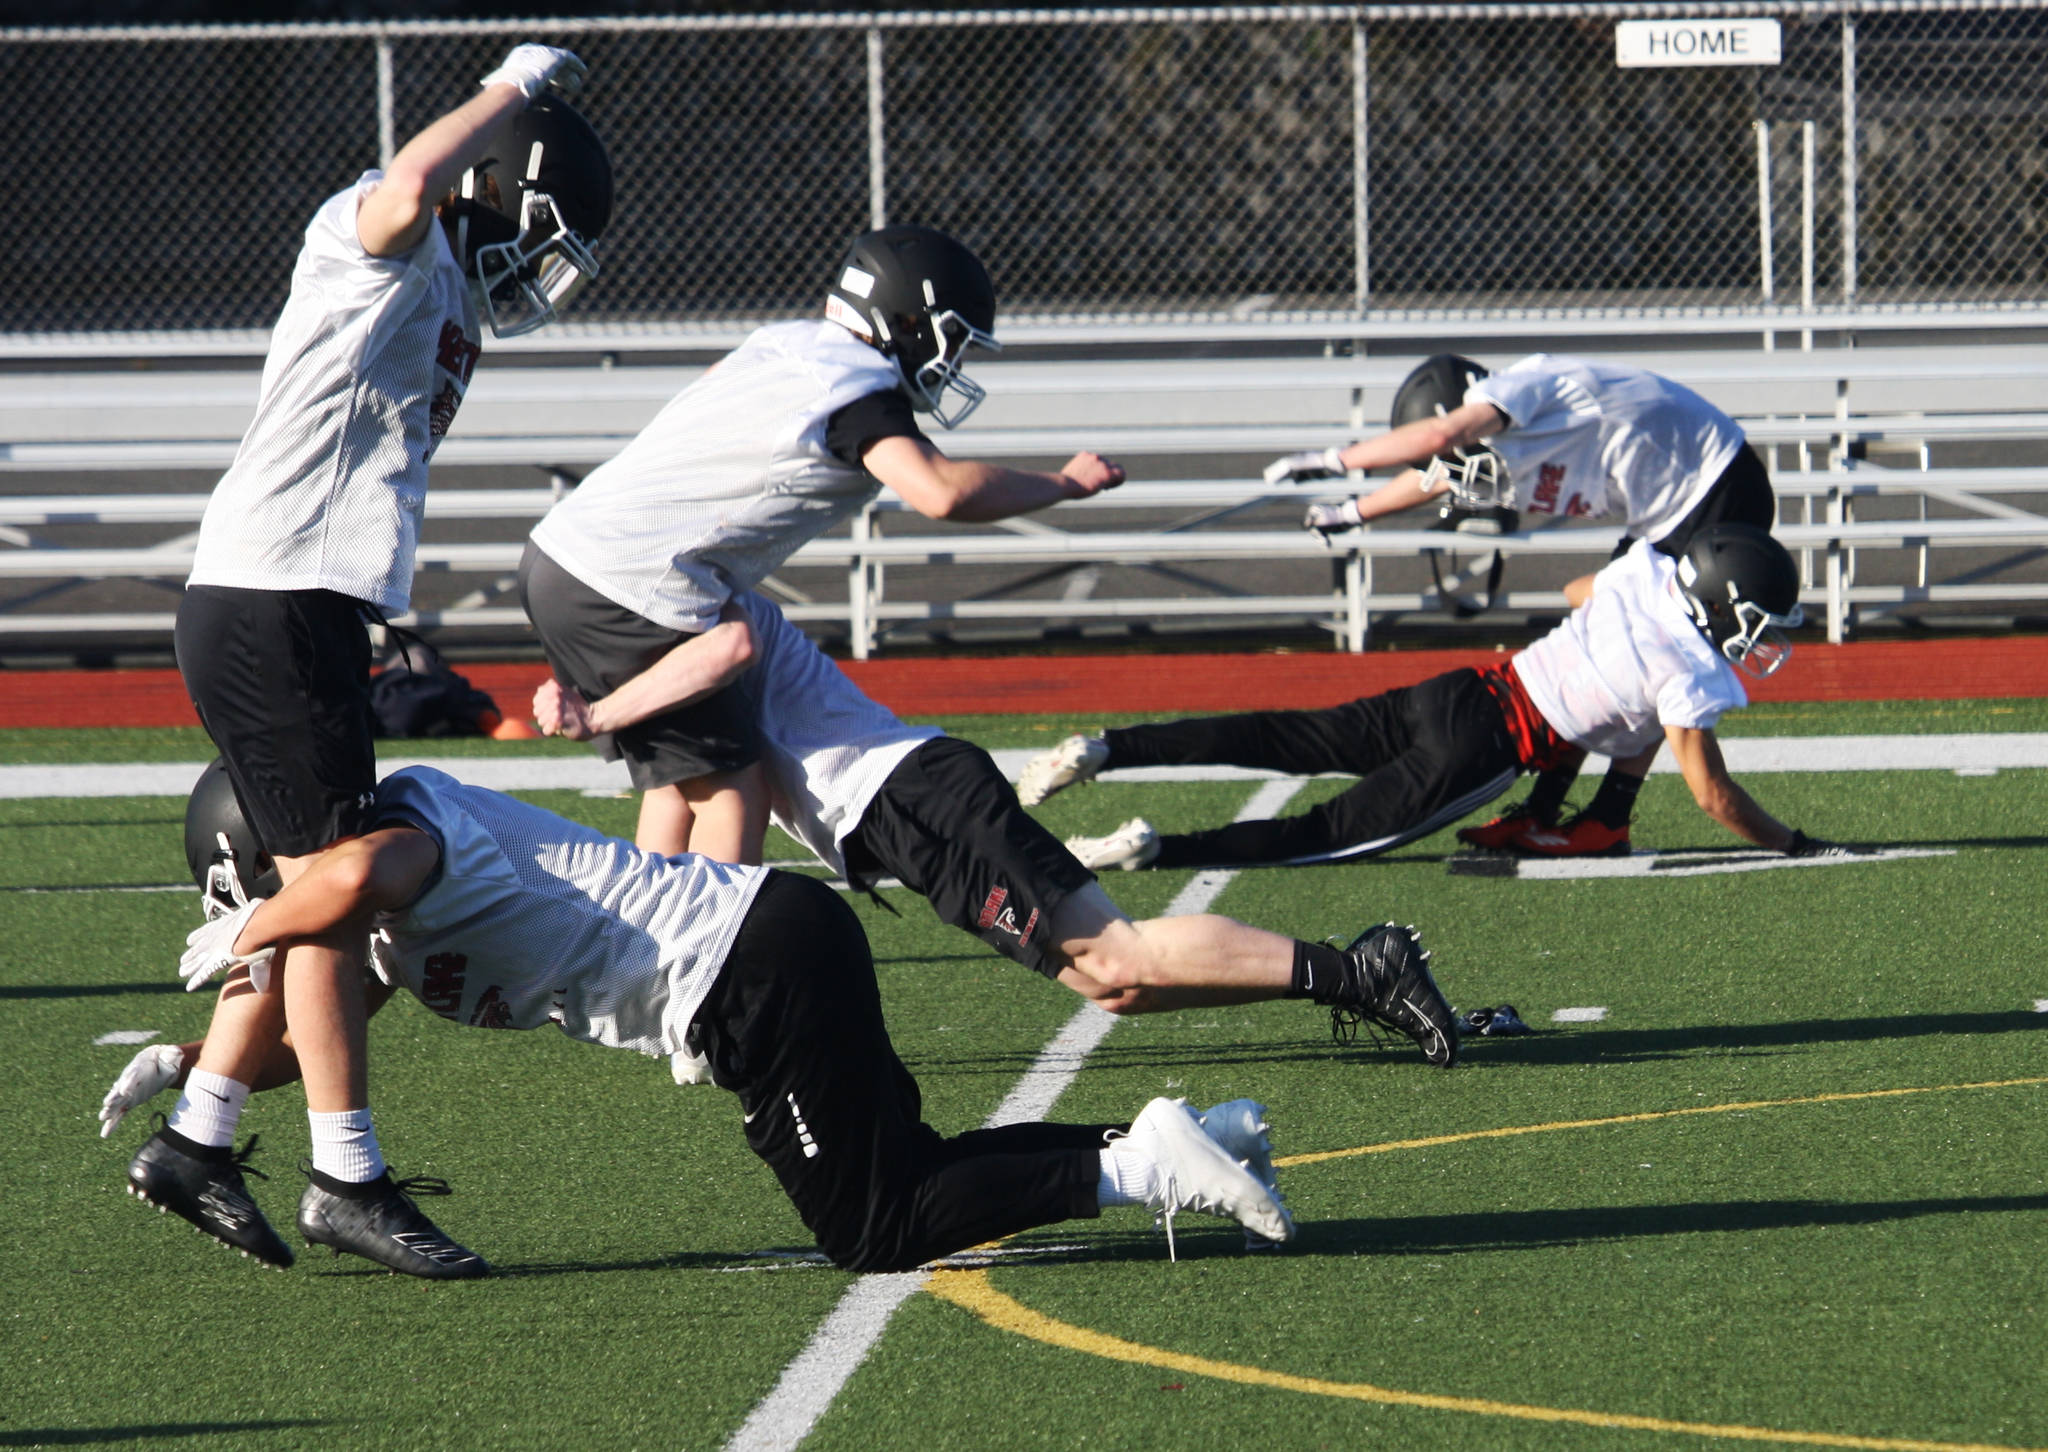 Kentlake High players work on a tackling drill during their first practice March 1 in preparation for games to begin March 12. STEVE HUNTER, Kent Reporter